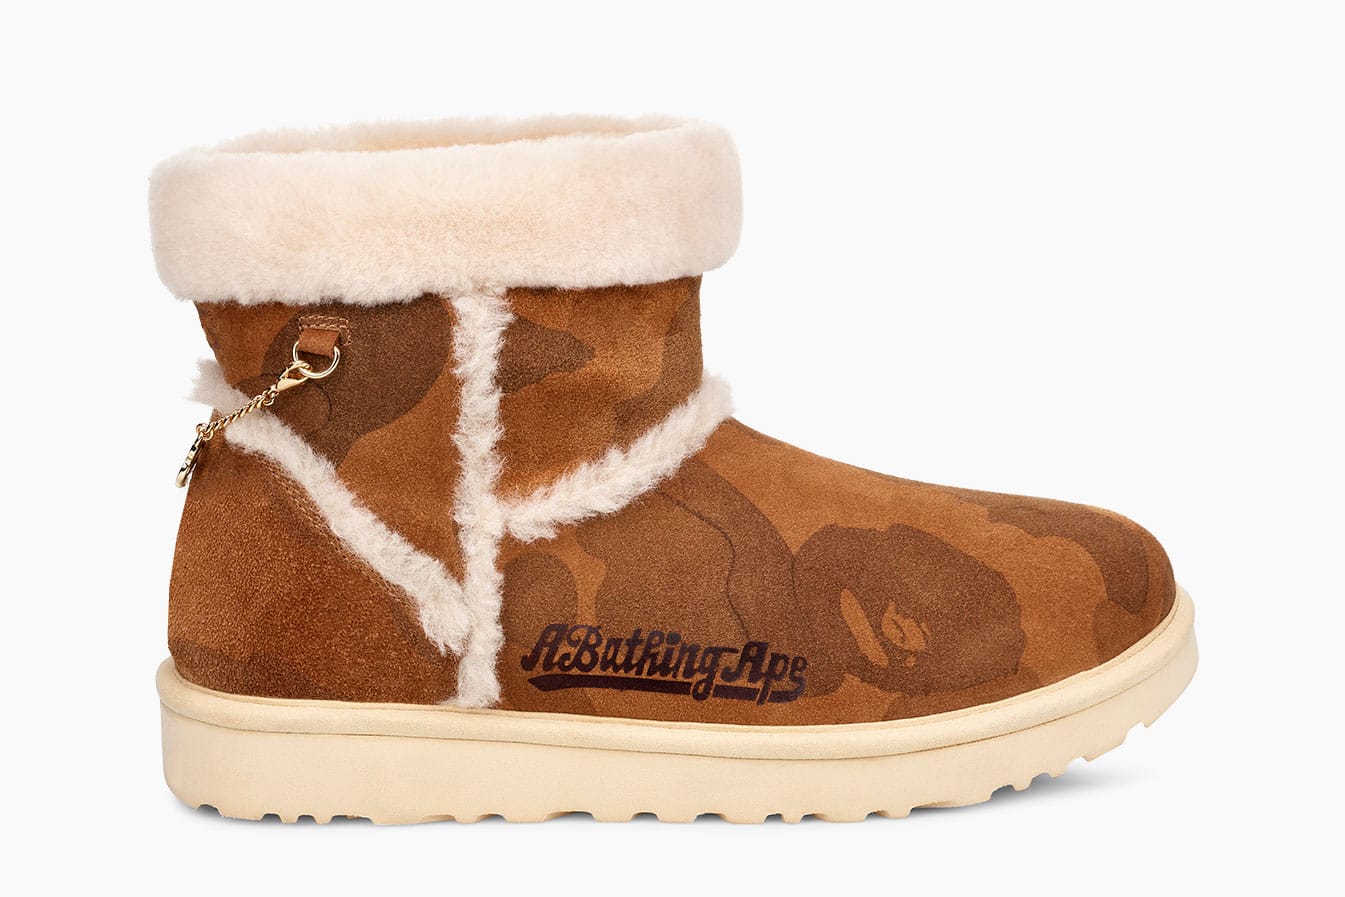 where can i buy uggs online